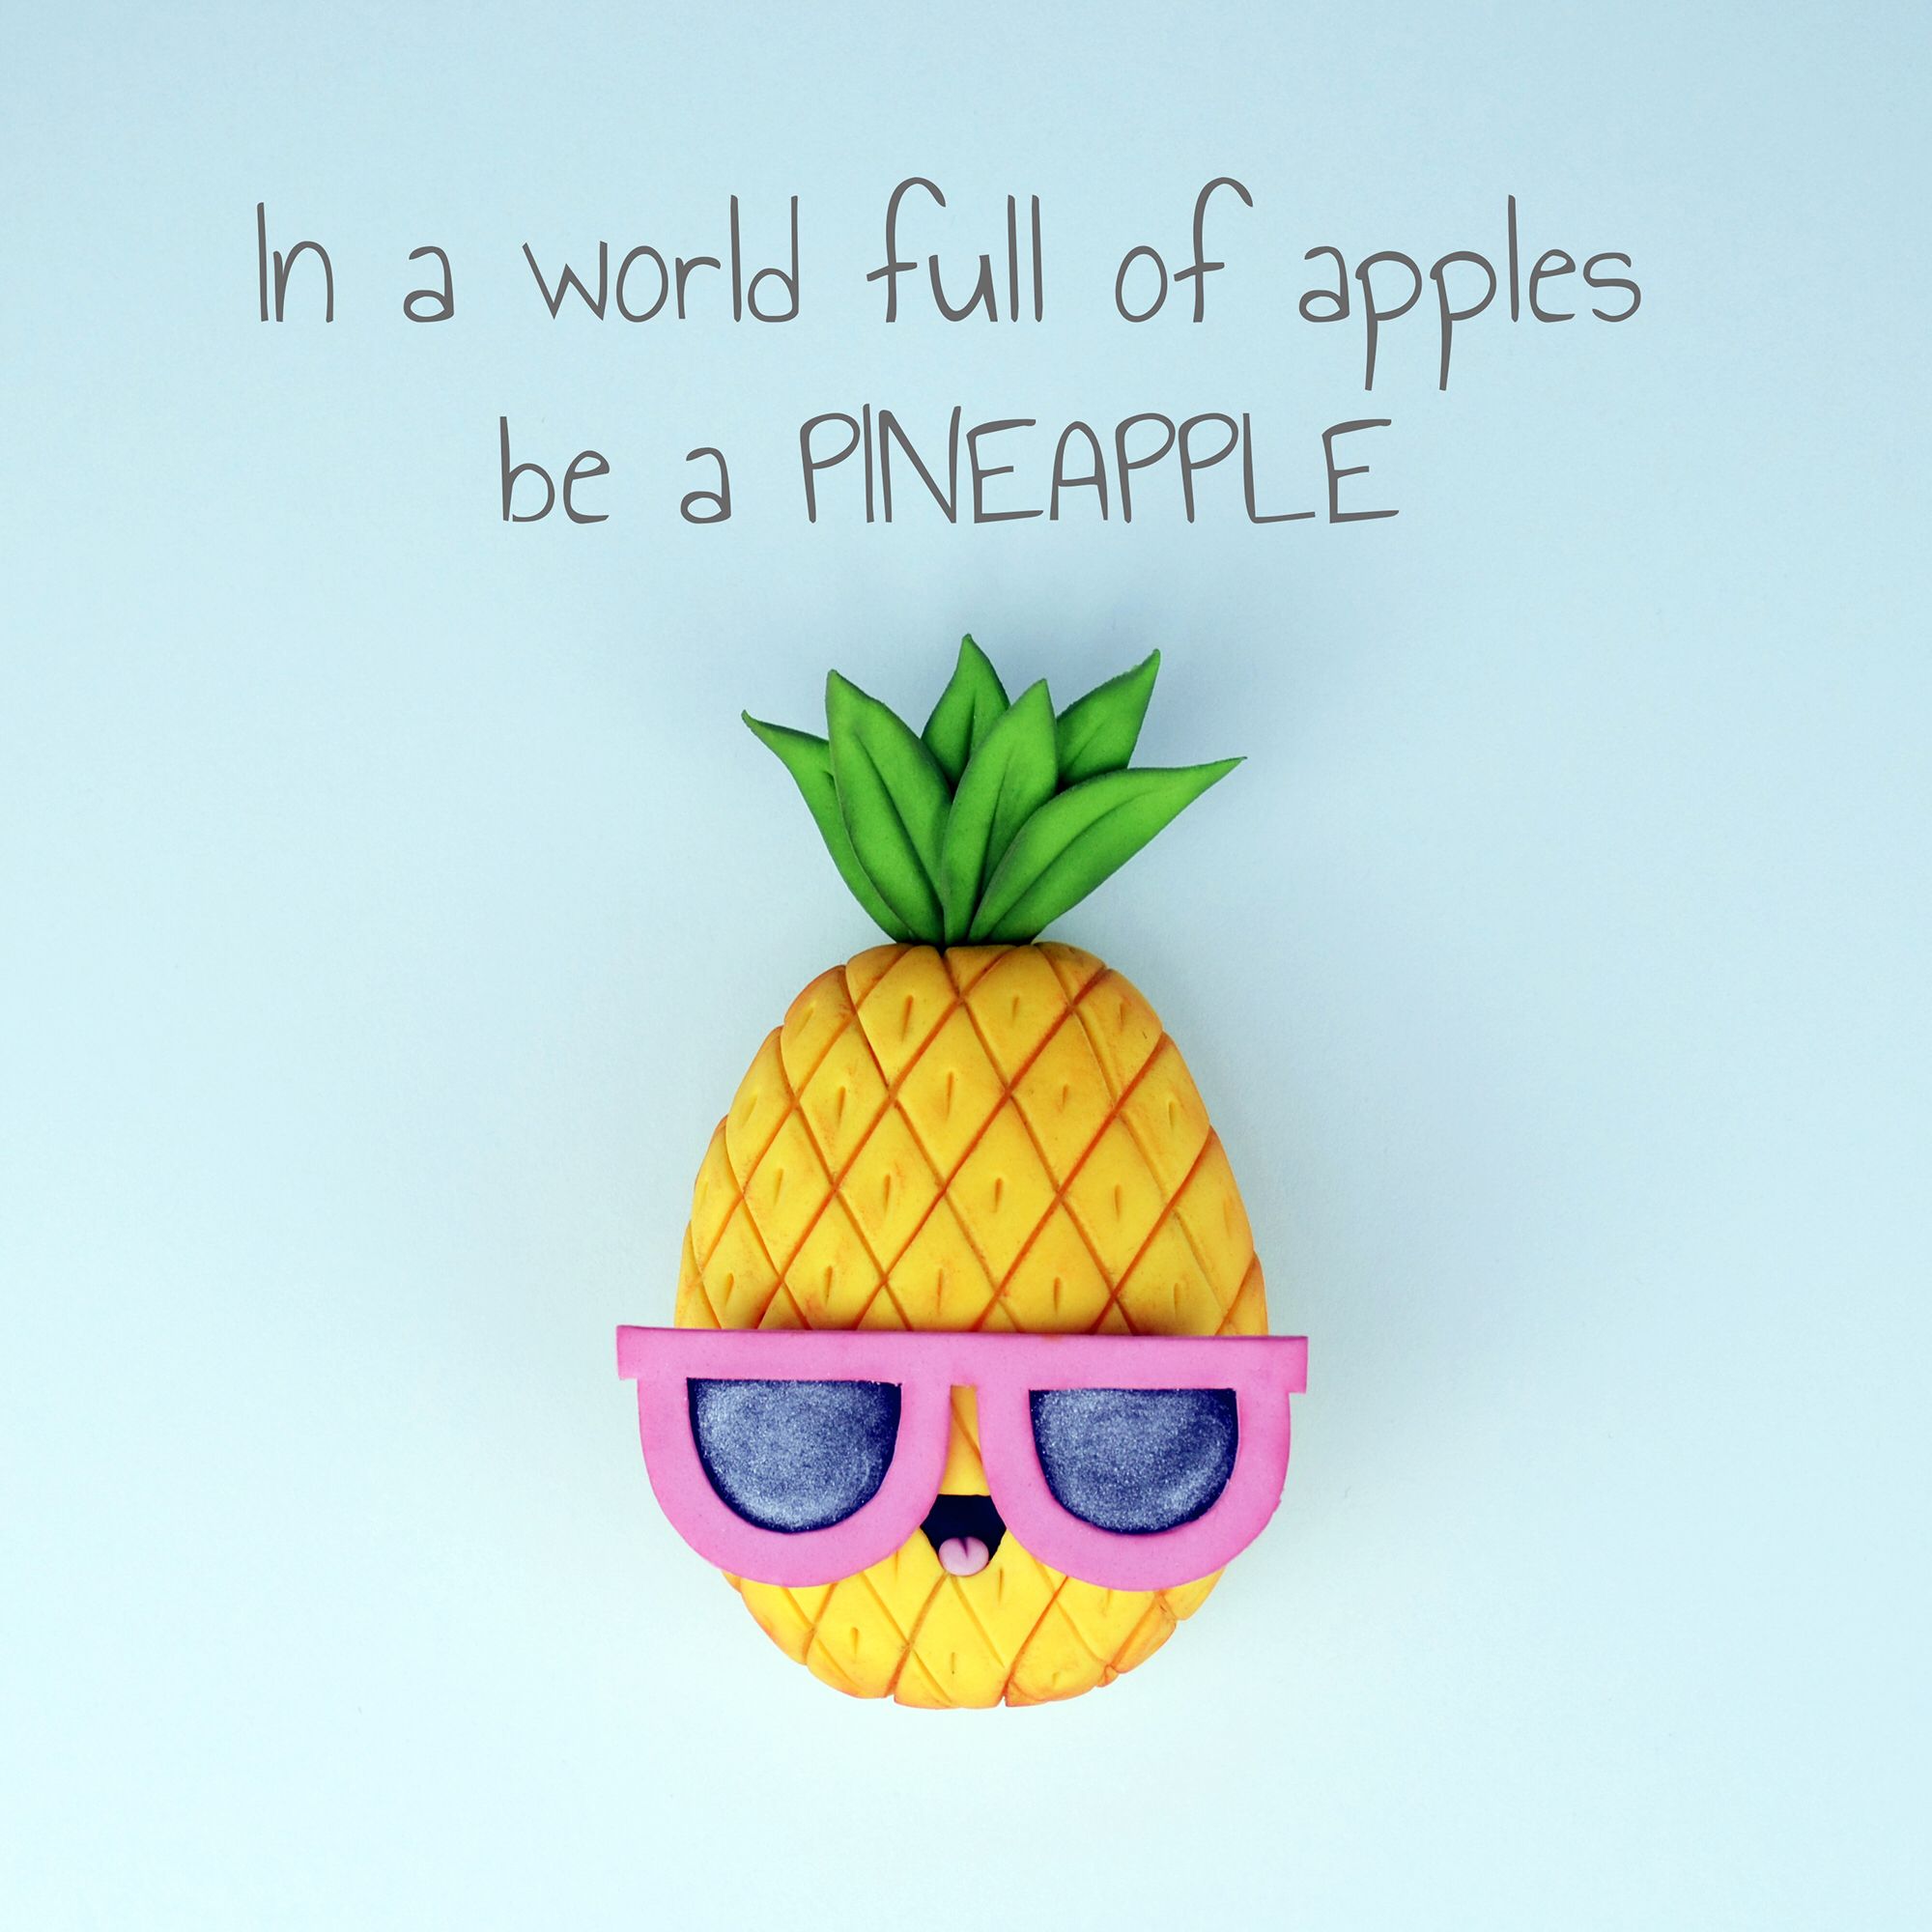 In a world full of apples be a PINEAPPLE ;). Pineapple quotes